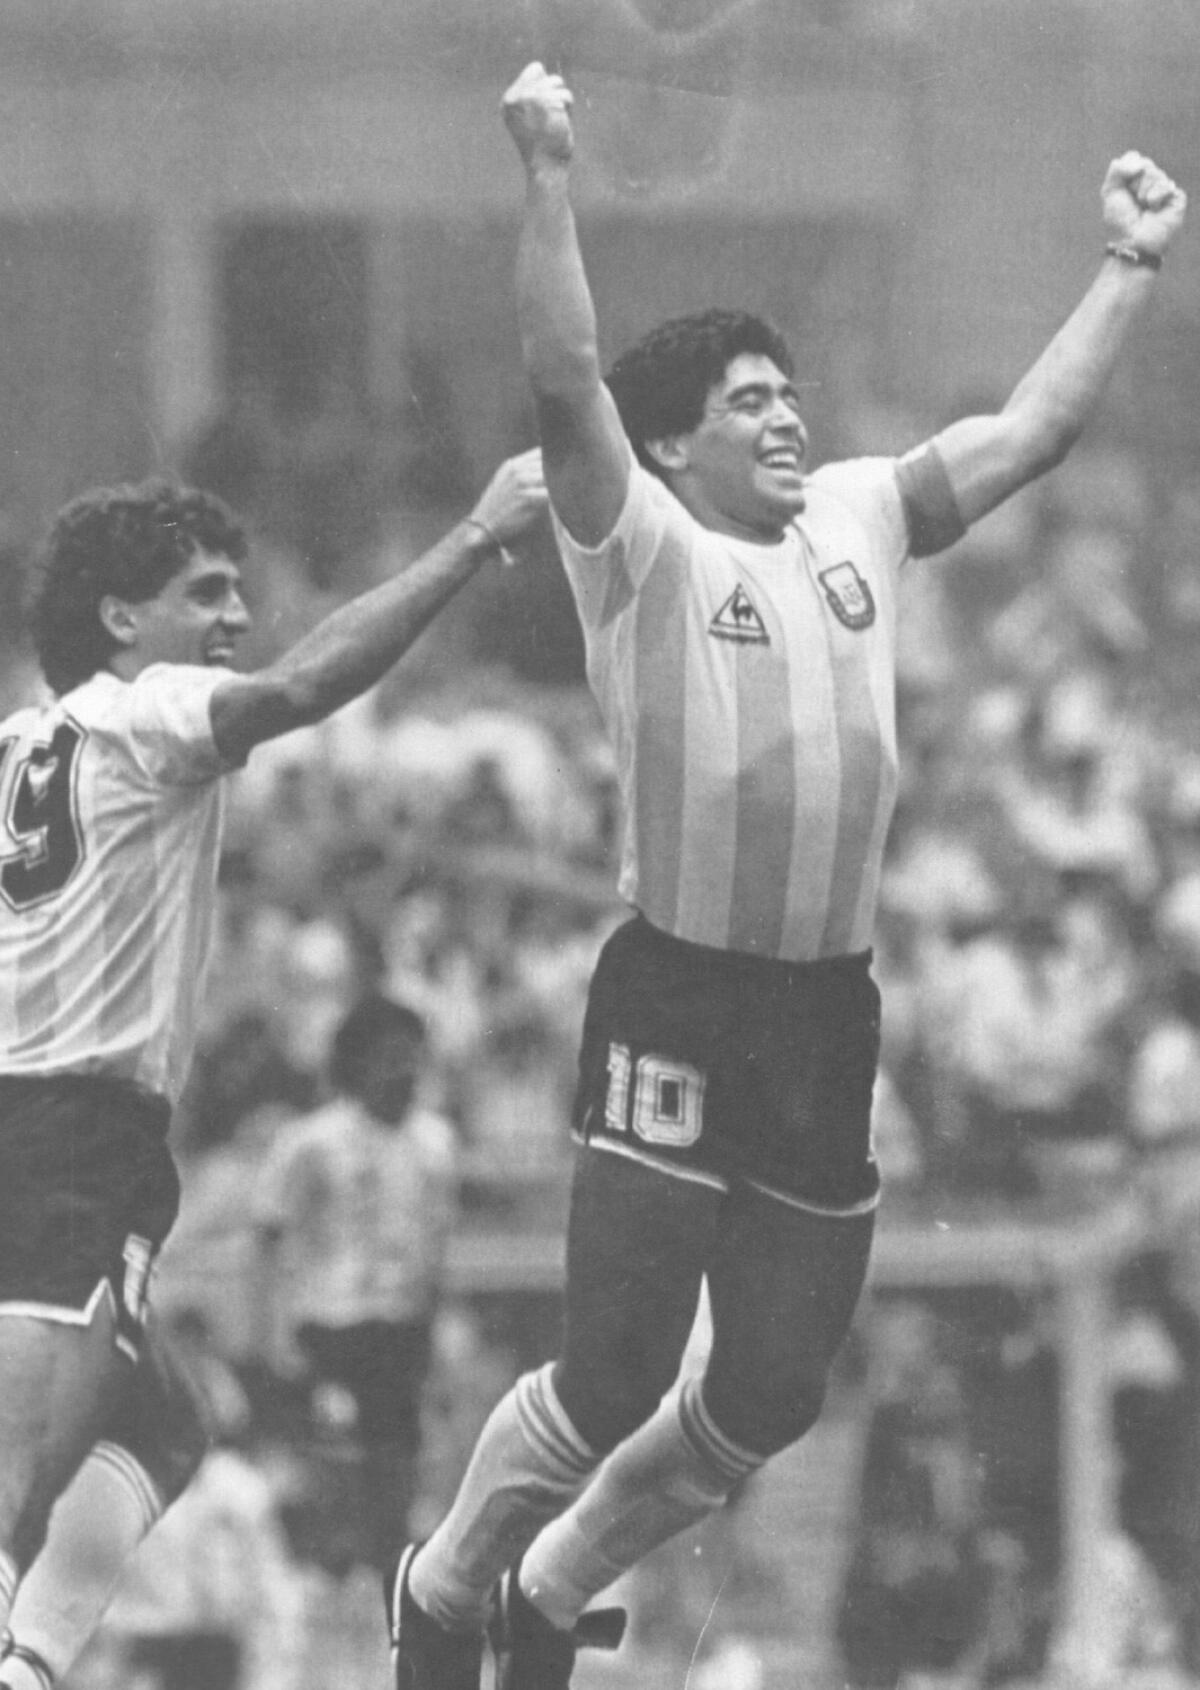 Diego Maradona celebrates after scoring his infamous "hand of God" goal against England in 1986.